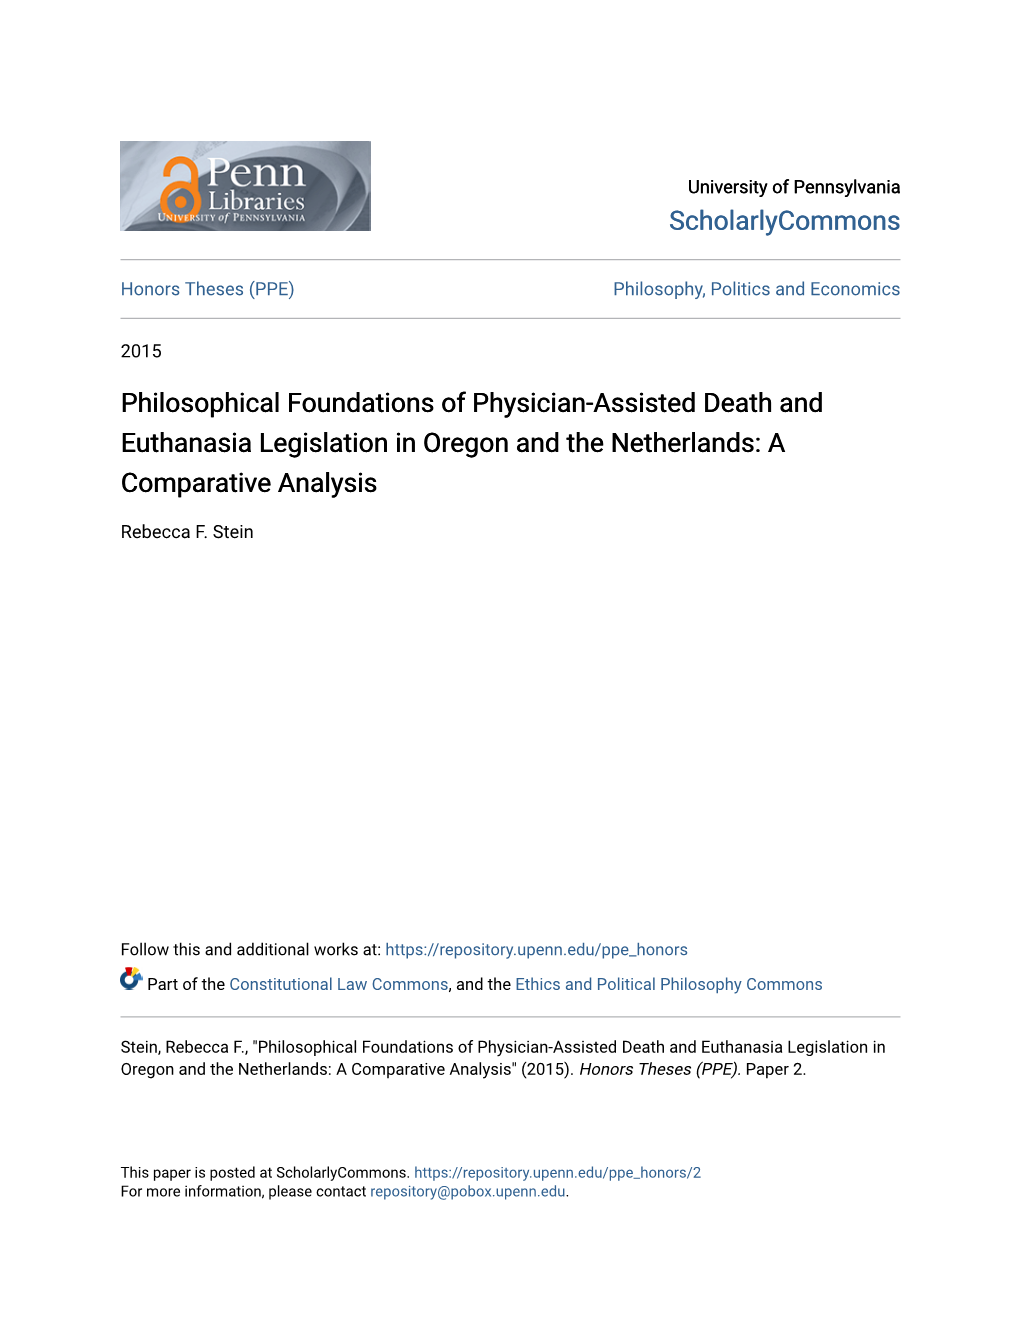 Philosophical Foundations of Physician-Assisted Death and Euthanasia Legislation in Oregon and the Netherlands: a Comparative Analysis